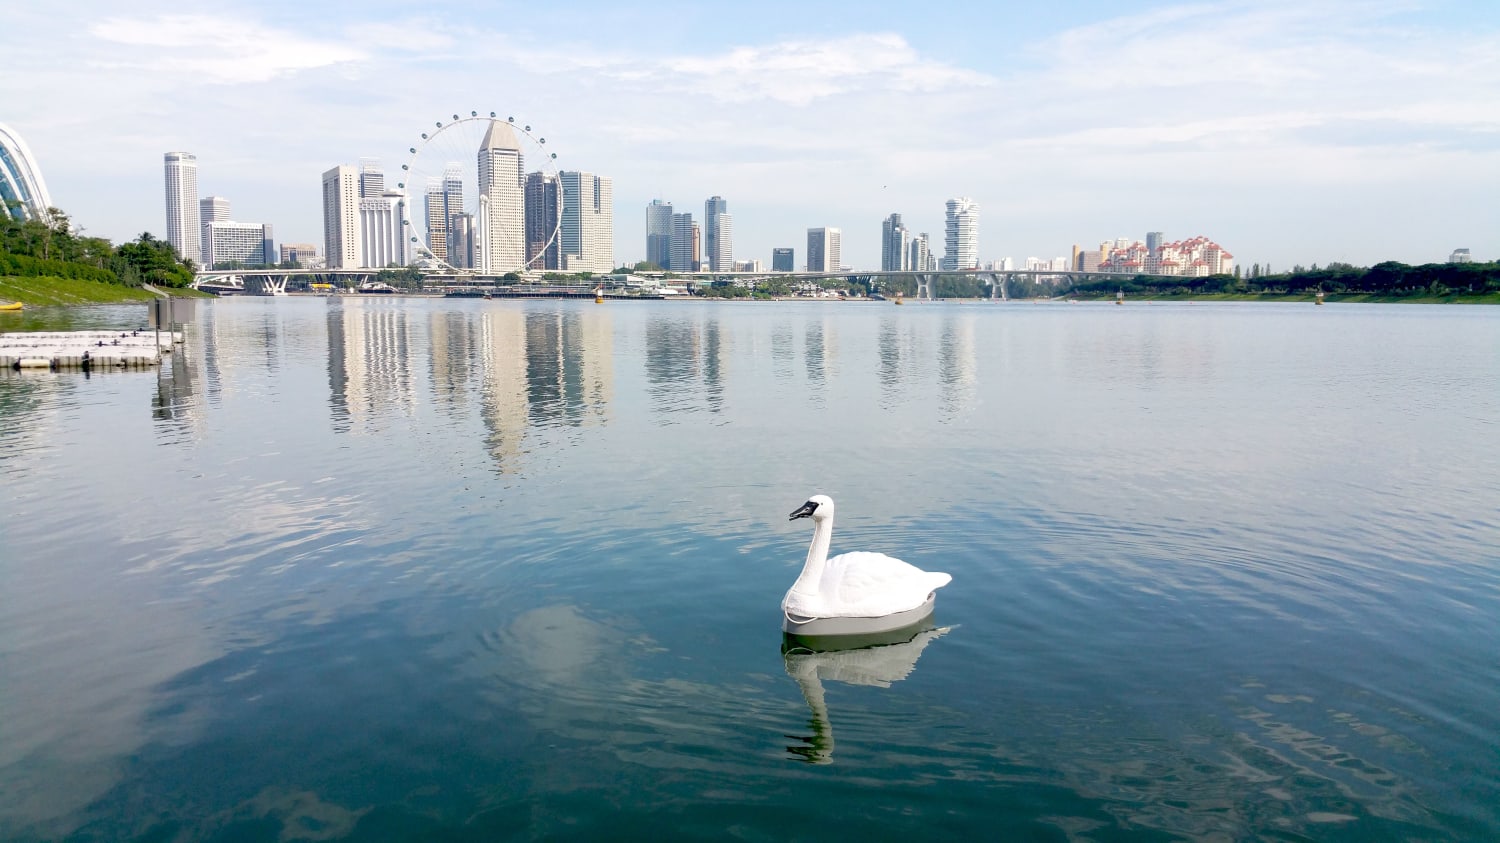 Researchers in Singapore Deploy Robot Swans to Test Water Quality